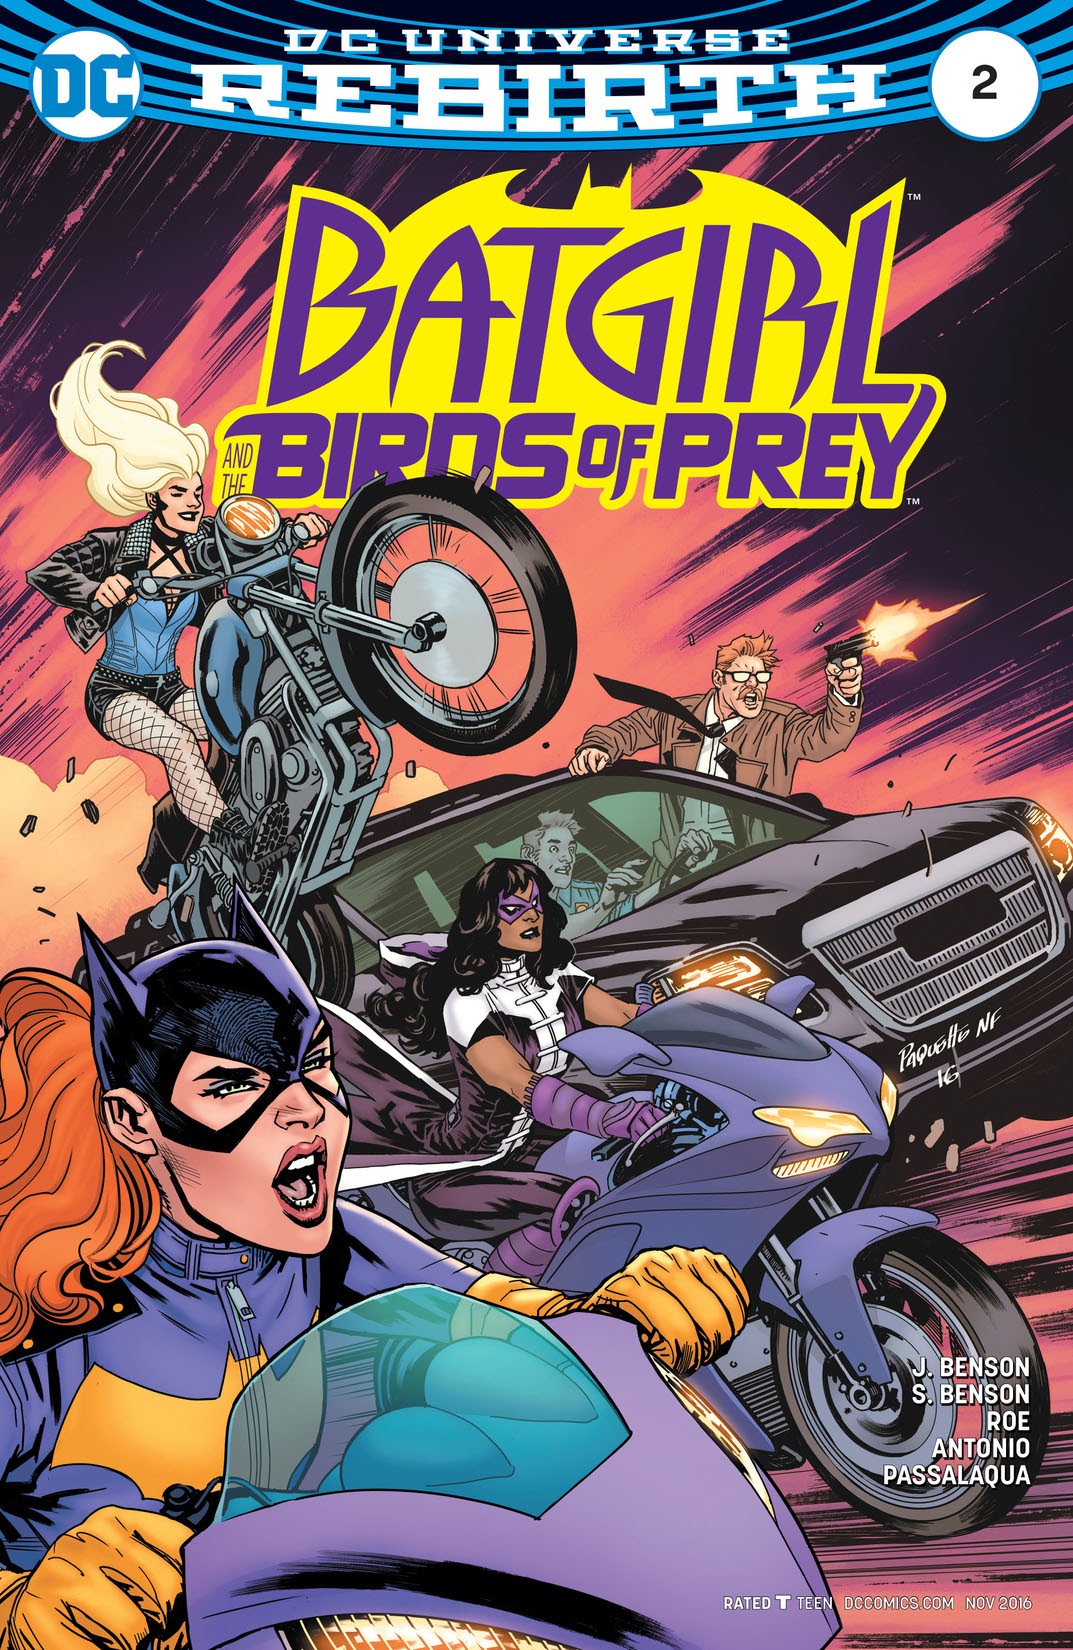 Batgirl and the Birds of Prey #2 preview images